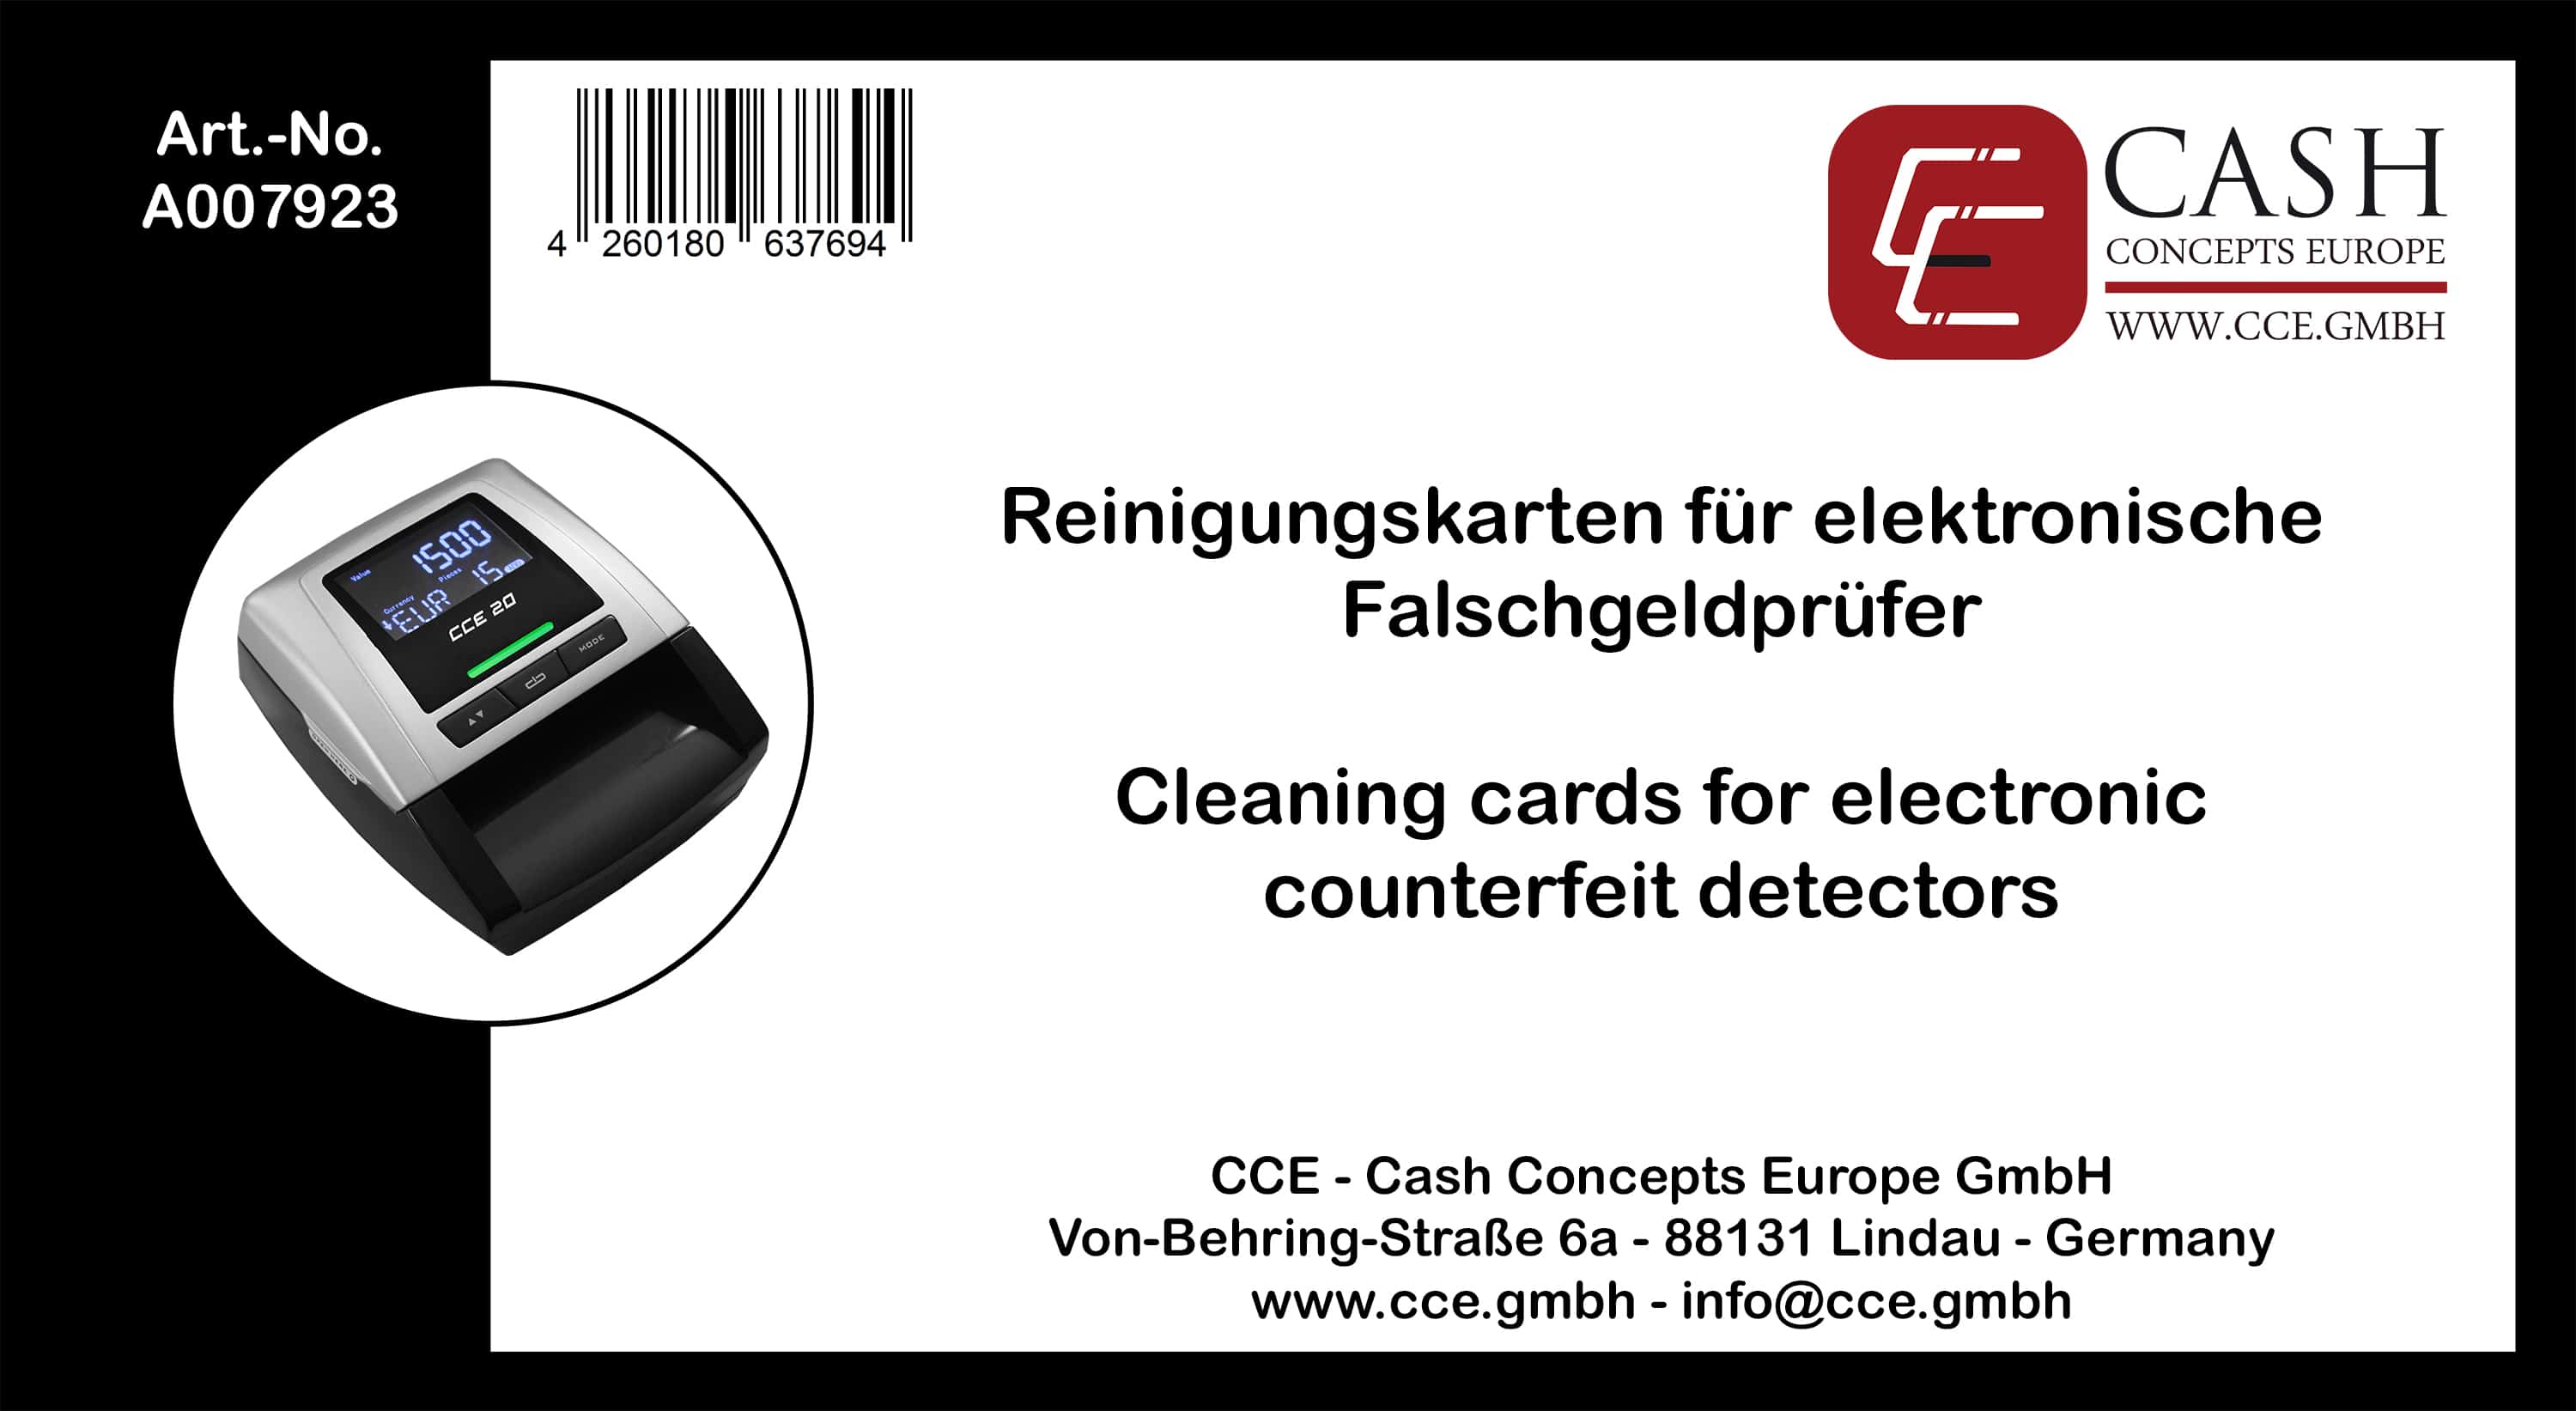 Cleaning cards for counterfeit detectors